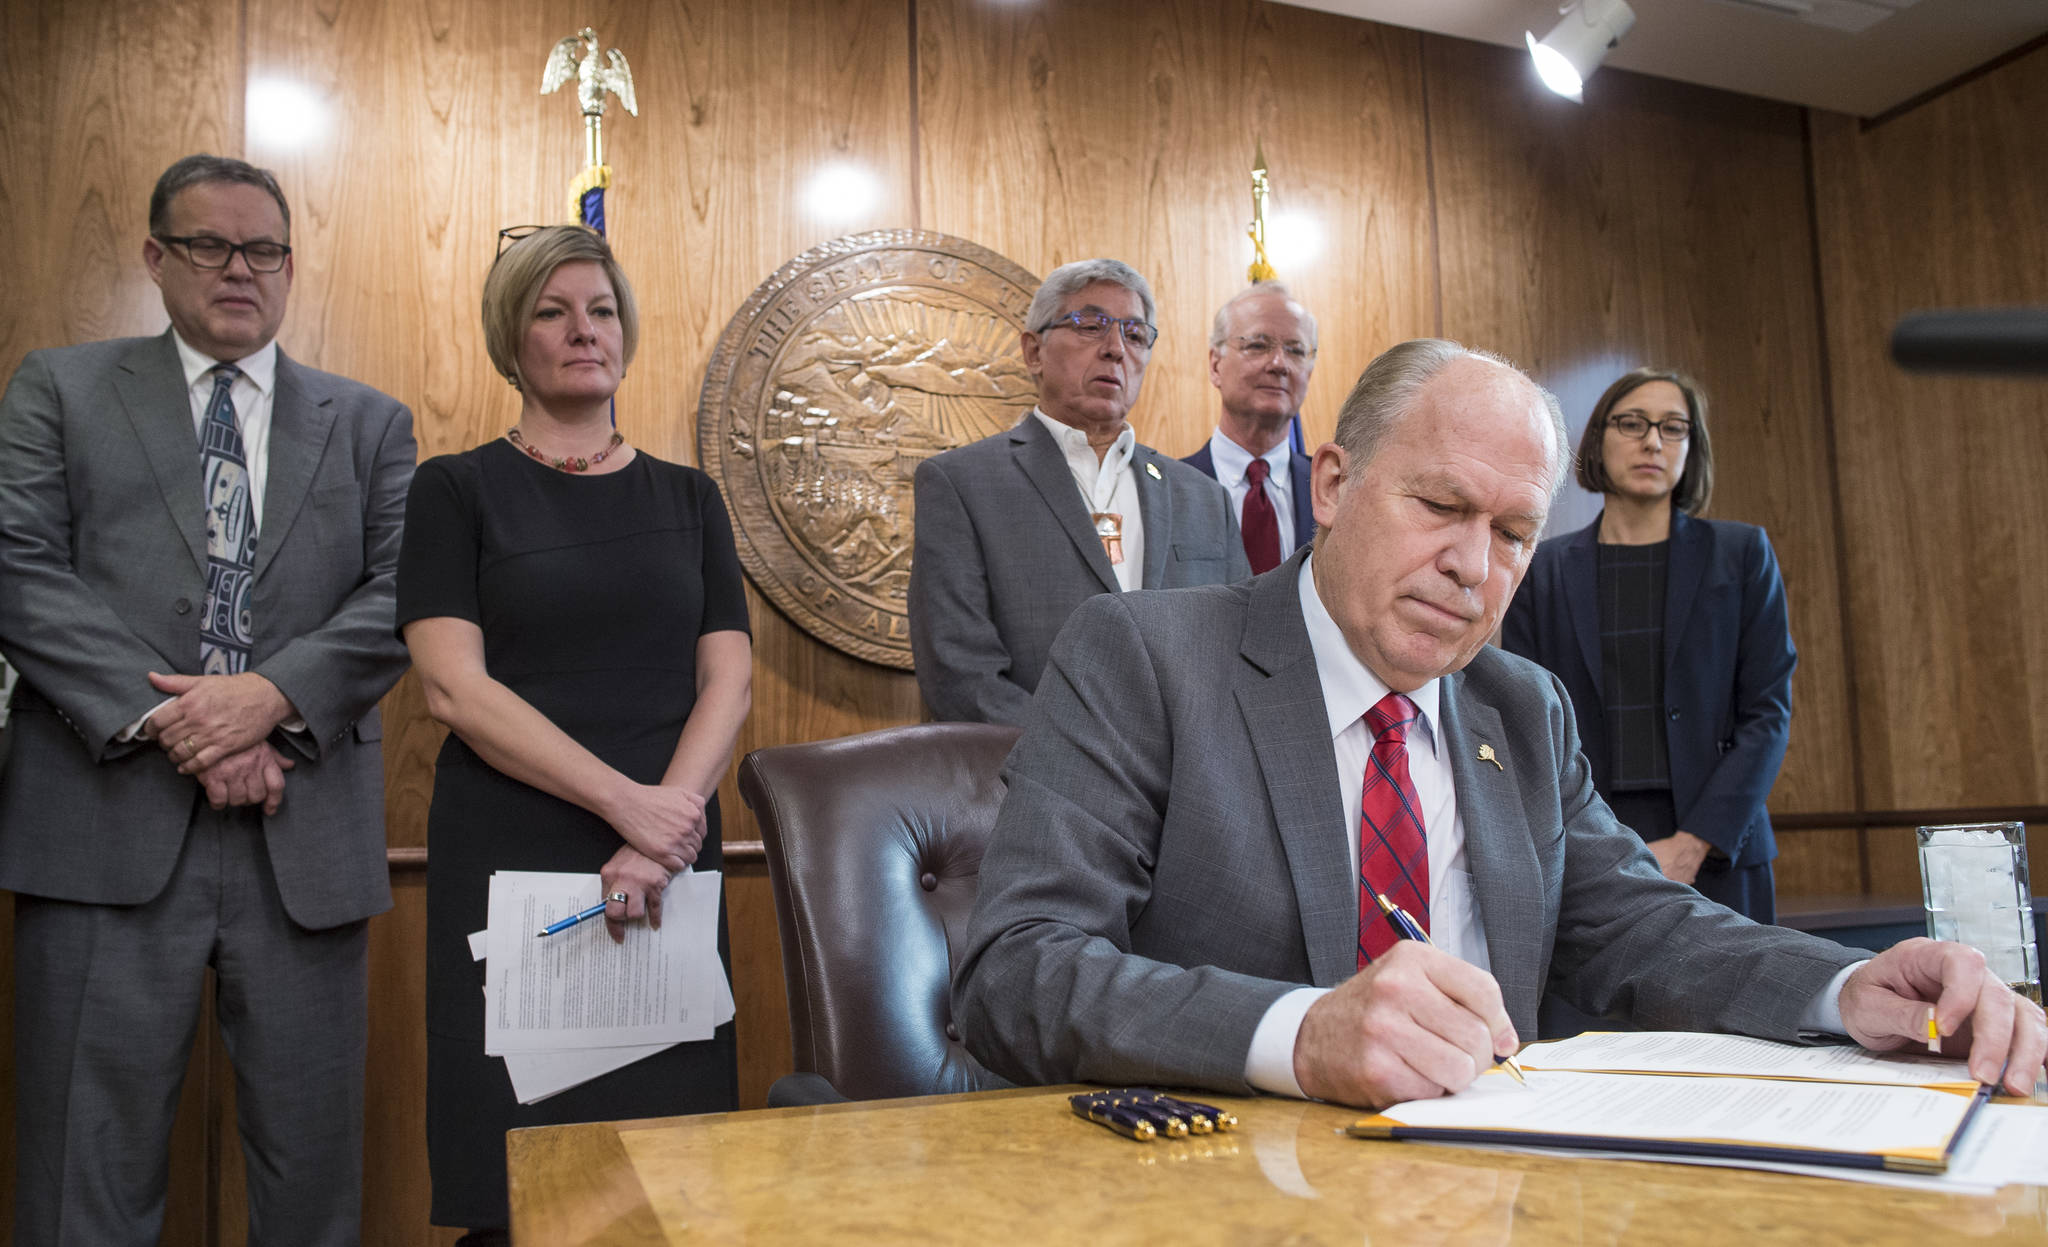 Gov. Bill Walker signs an Executive Order in his Capitol conference room on Tuesday, Oct. 31, 2017, outlining his administration’s policy on climate change and creating the Climate Action for Alaska Leadership Team. Standing behind Gov. Walker are Department of Commerce, Community & Economic Development Deputy Commissioner Fred Parady, left, Attorney General Jahna Lindemuth, Lt. Gov. Byron Mallott, Department of Environmental Conservation Commissioner Larry Hartig and Senior Advisor on Climate Change Dr. Nikoosh Carlo. (Michael Penn | Juneau Empire File)